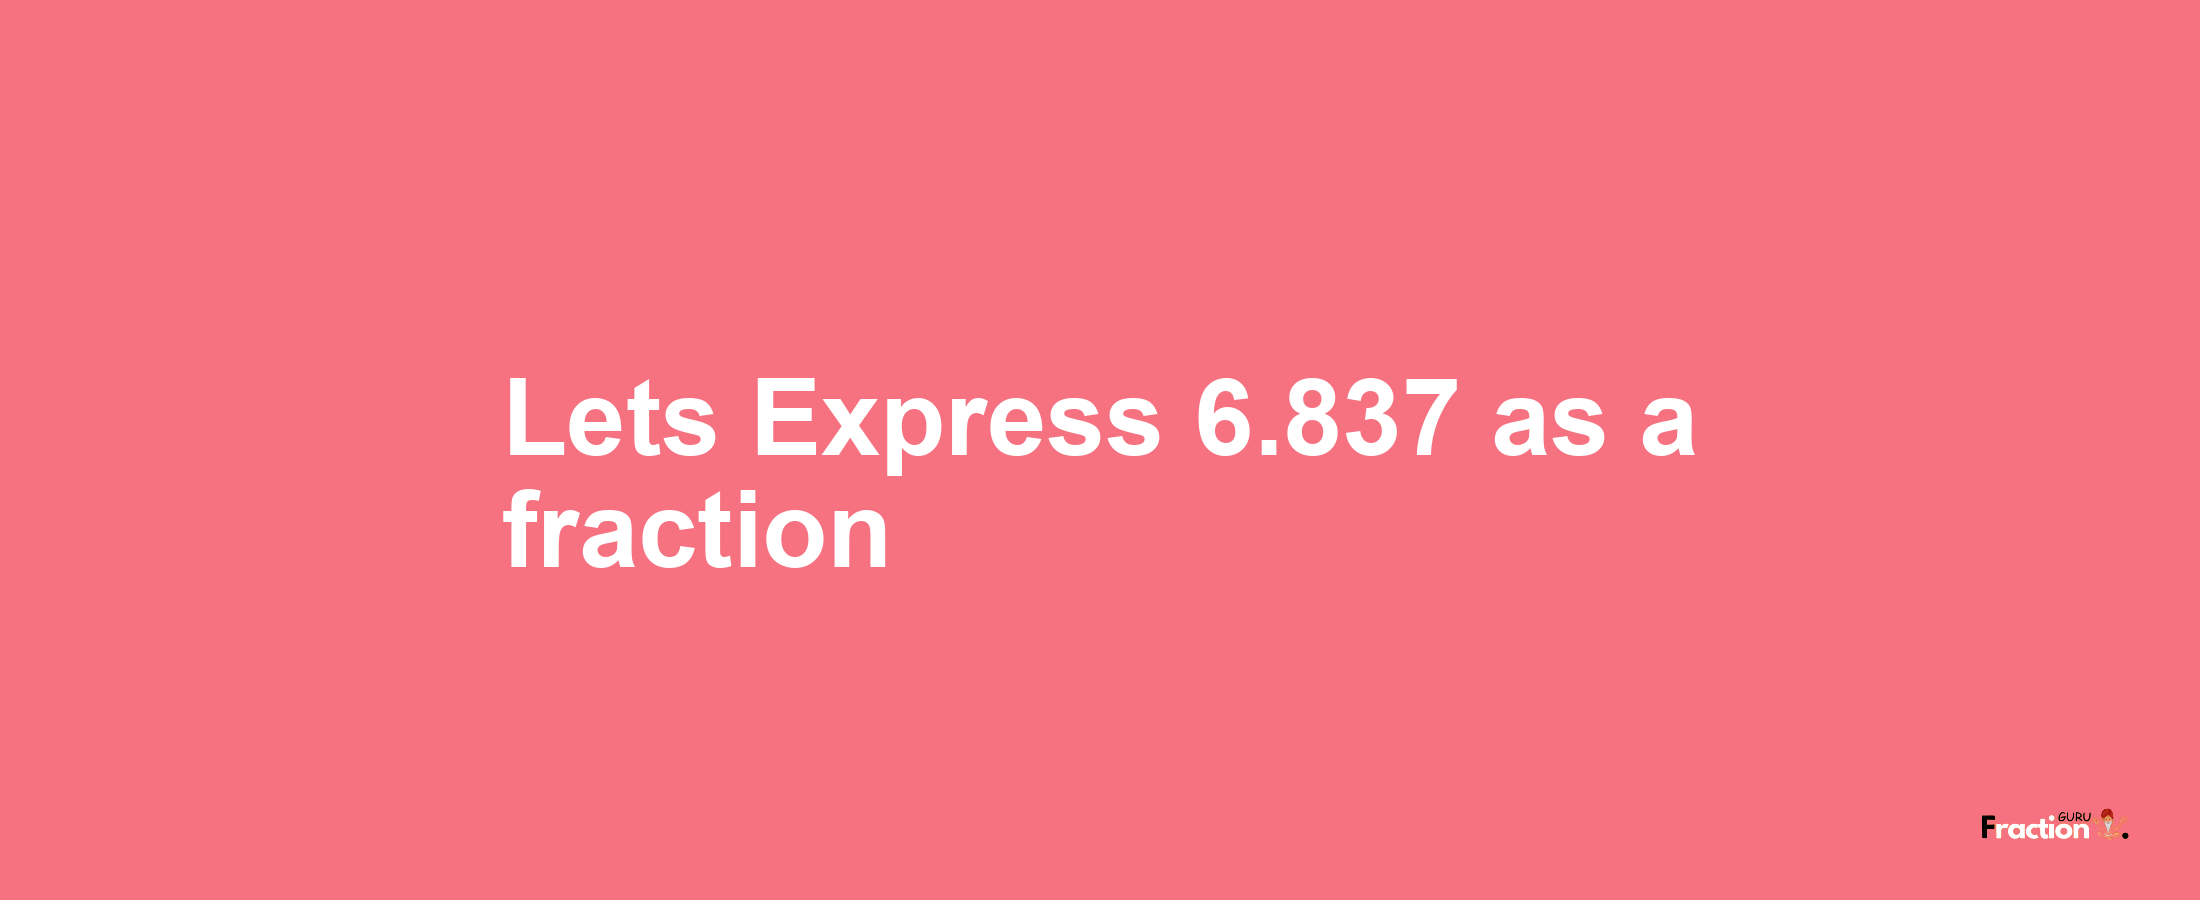 Lets Express 6.837 as afraction